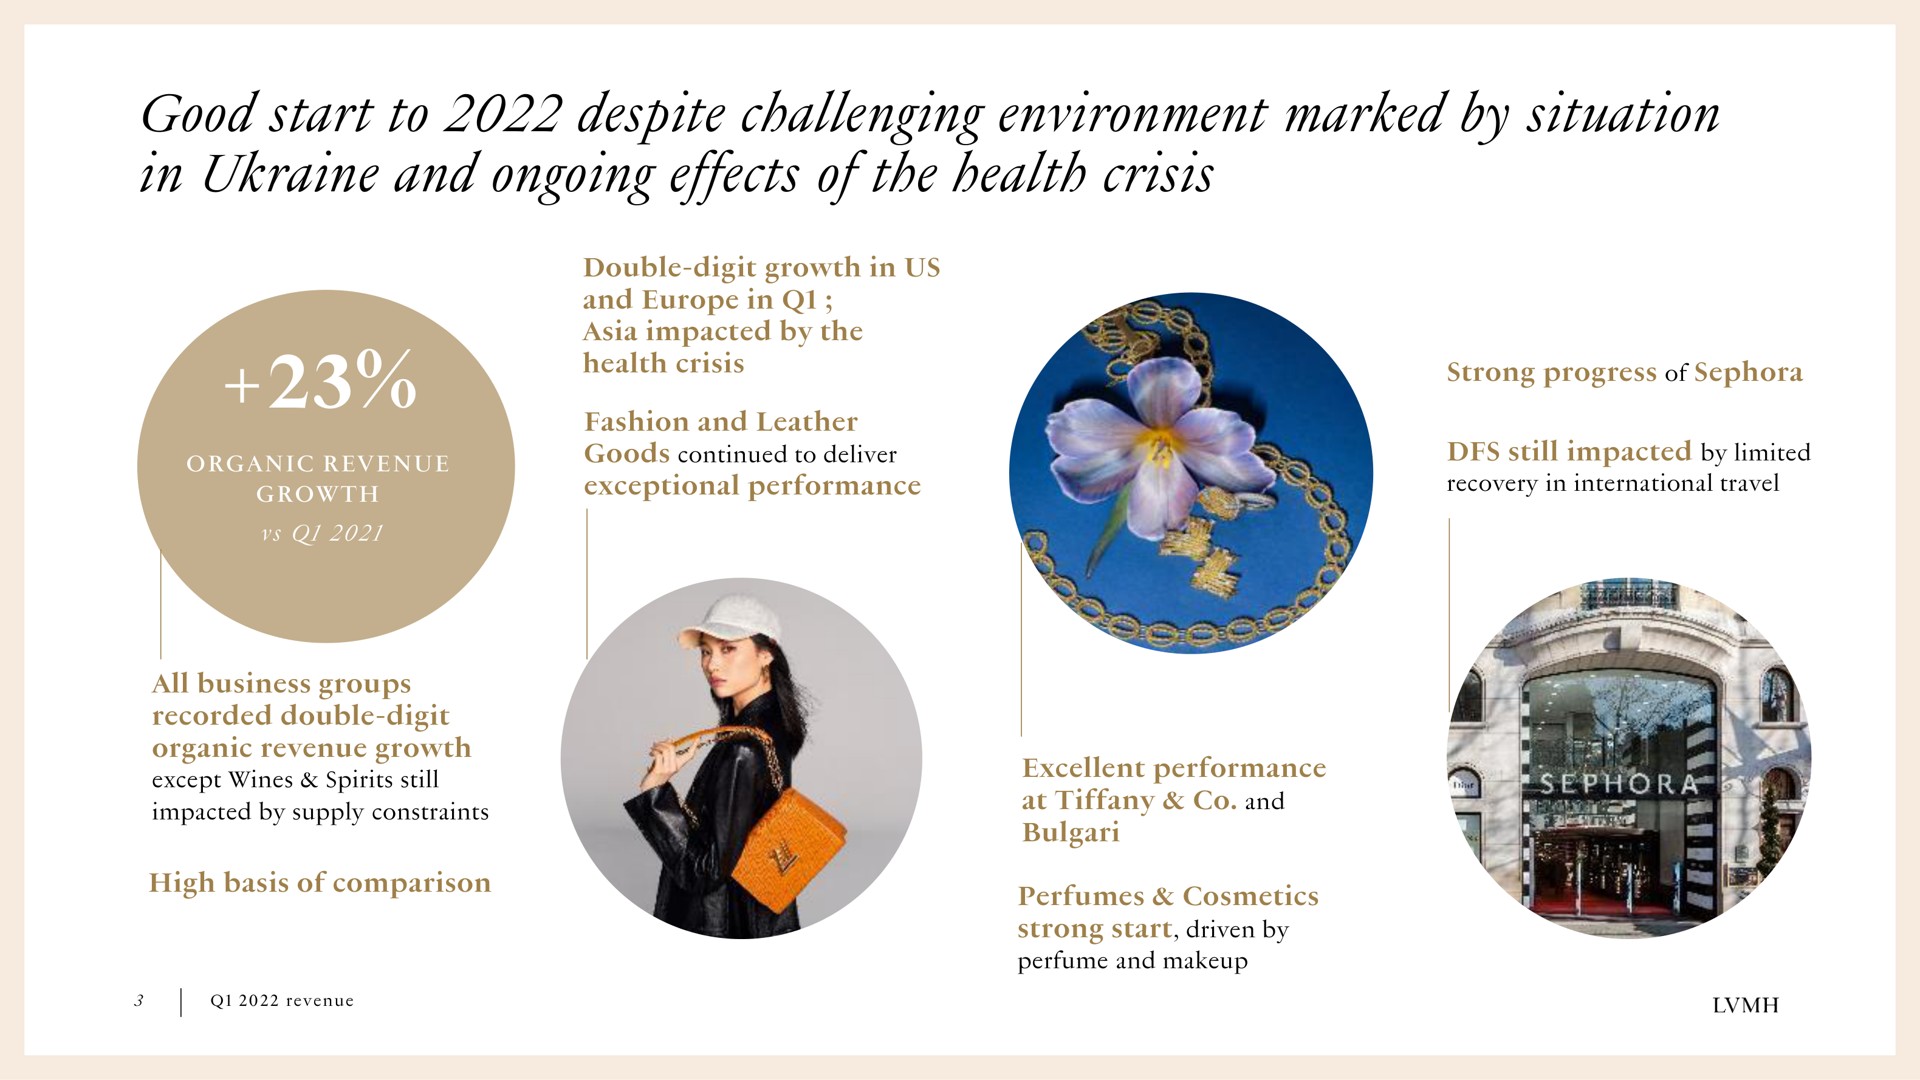 good start to despite challenging environment marked by situation in and ongoing effects of the health crisis | LVMH